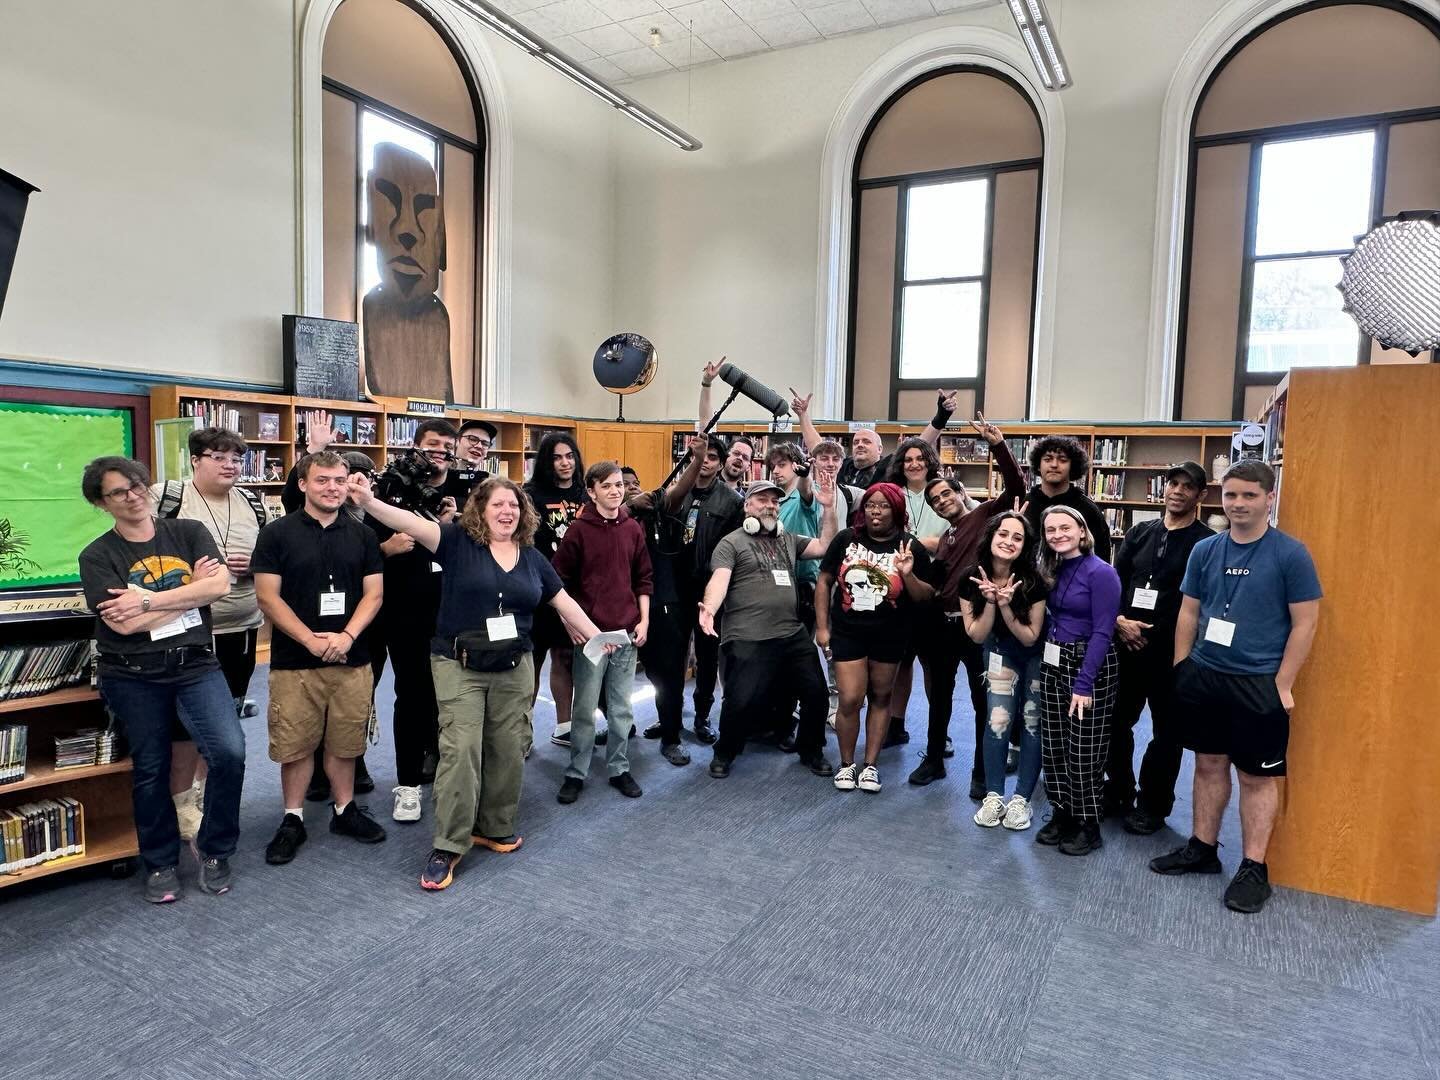 That's a wrap on the pilot year of our SWAY (Stockade Works Access Youth) program!

Did you know that we launched an in-school teen program this year? SWAY offered @ellenvillecsd students a full school year of gear training, pre-production, and depar